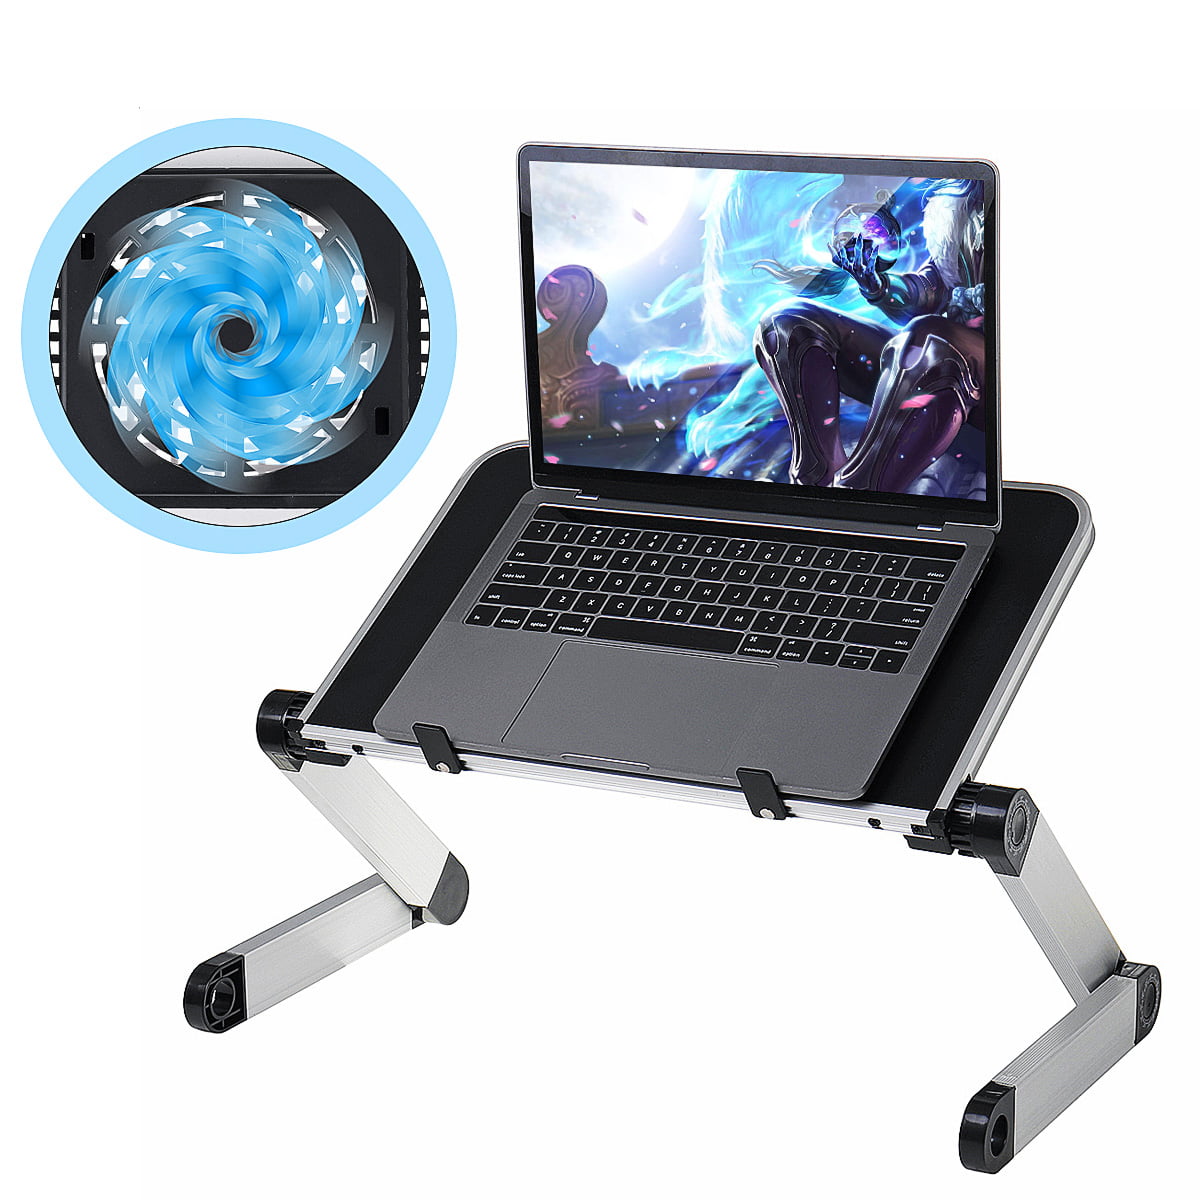 Adjustable Laptop Stand Lightweight and Multi-Functional for Work School Mount-It Portable Standing Desk Home and Bed Large Size Aluminum Bed Lap Tray for Notebook 